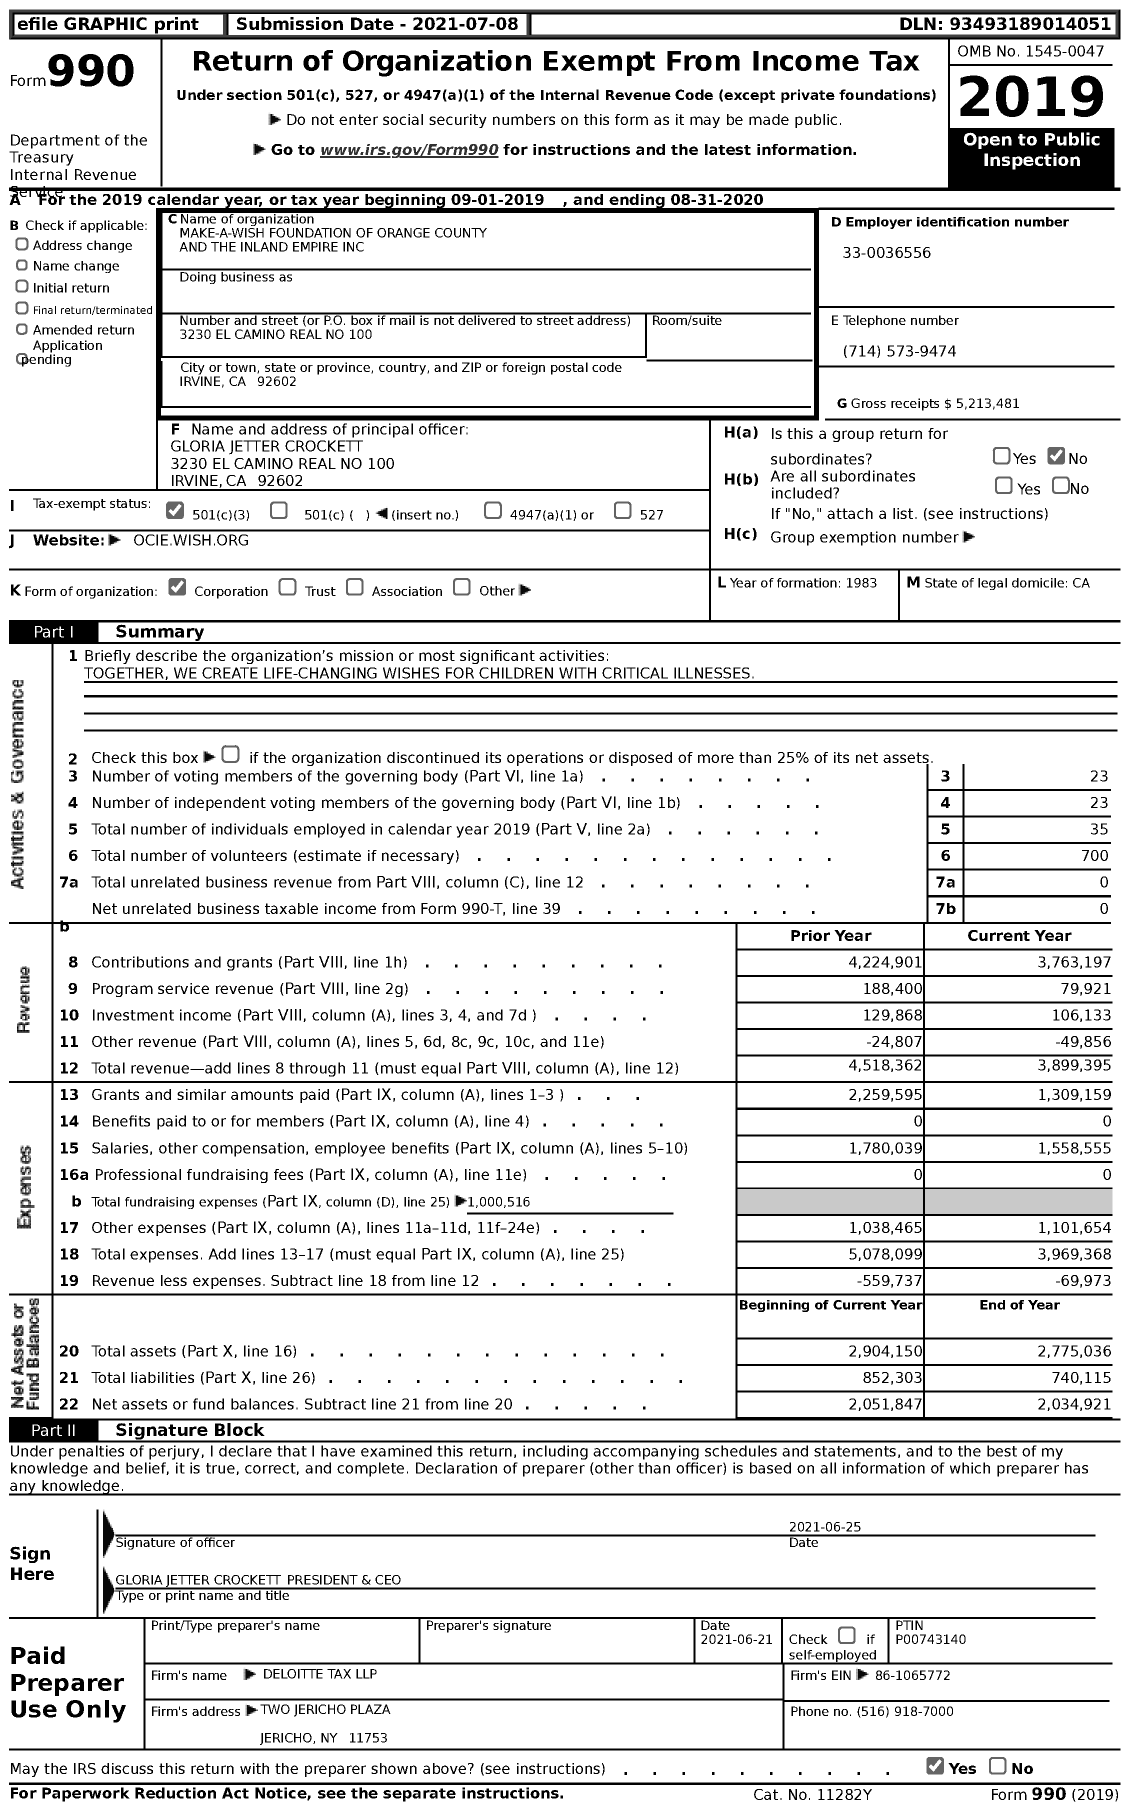 Image of first page of 2019 Form 990 for Make-A-Wish Foundation of Orange County and the Inland Empire